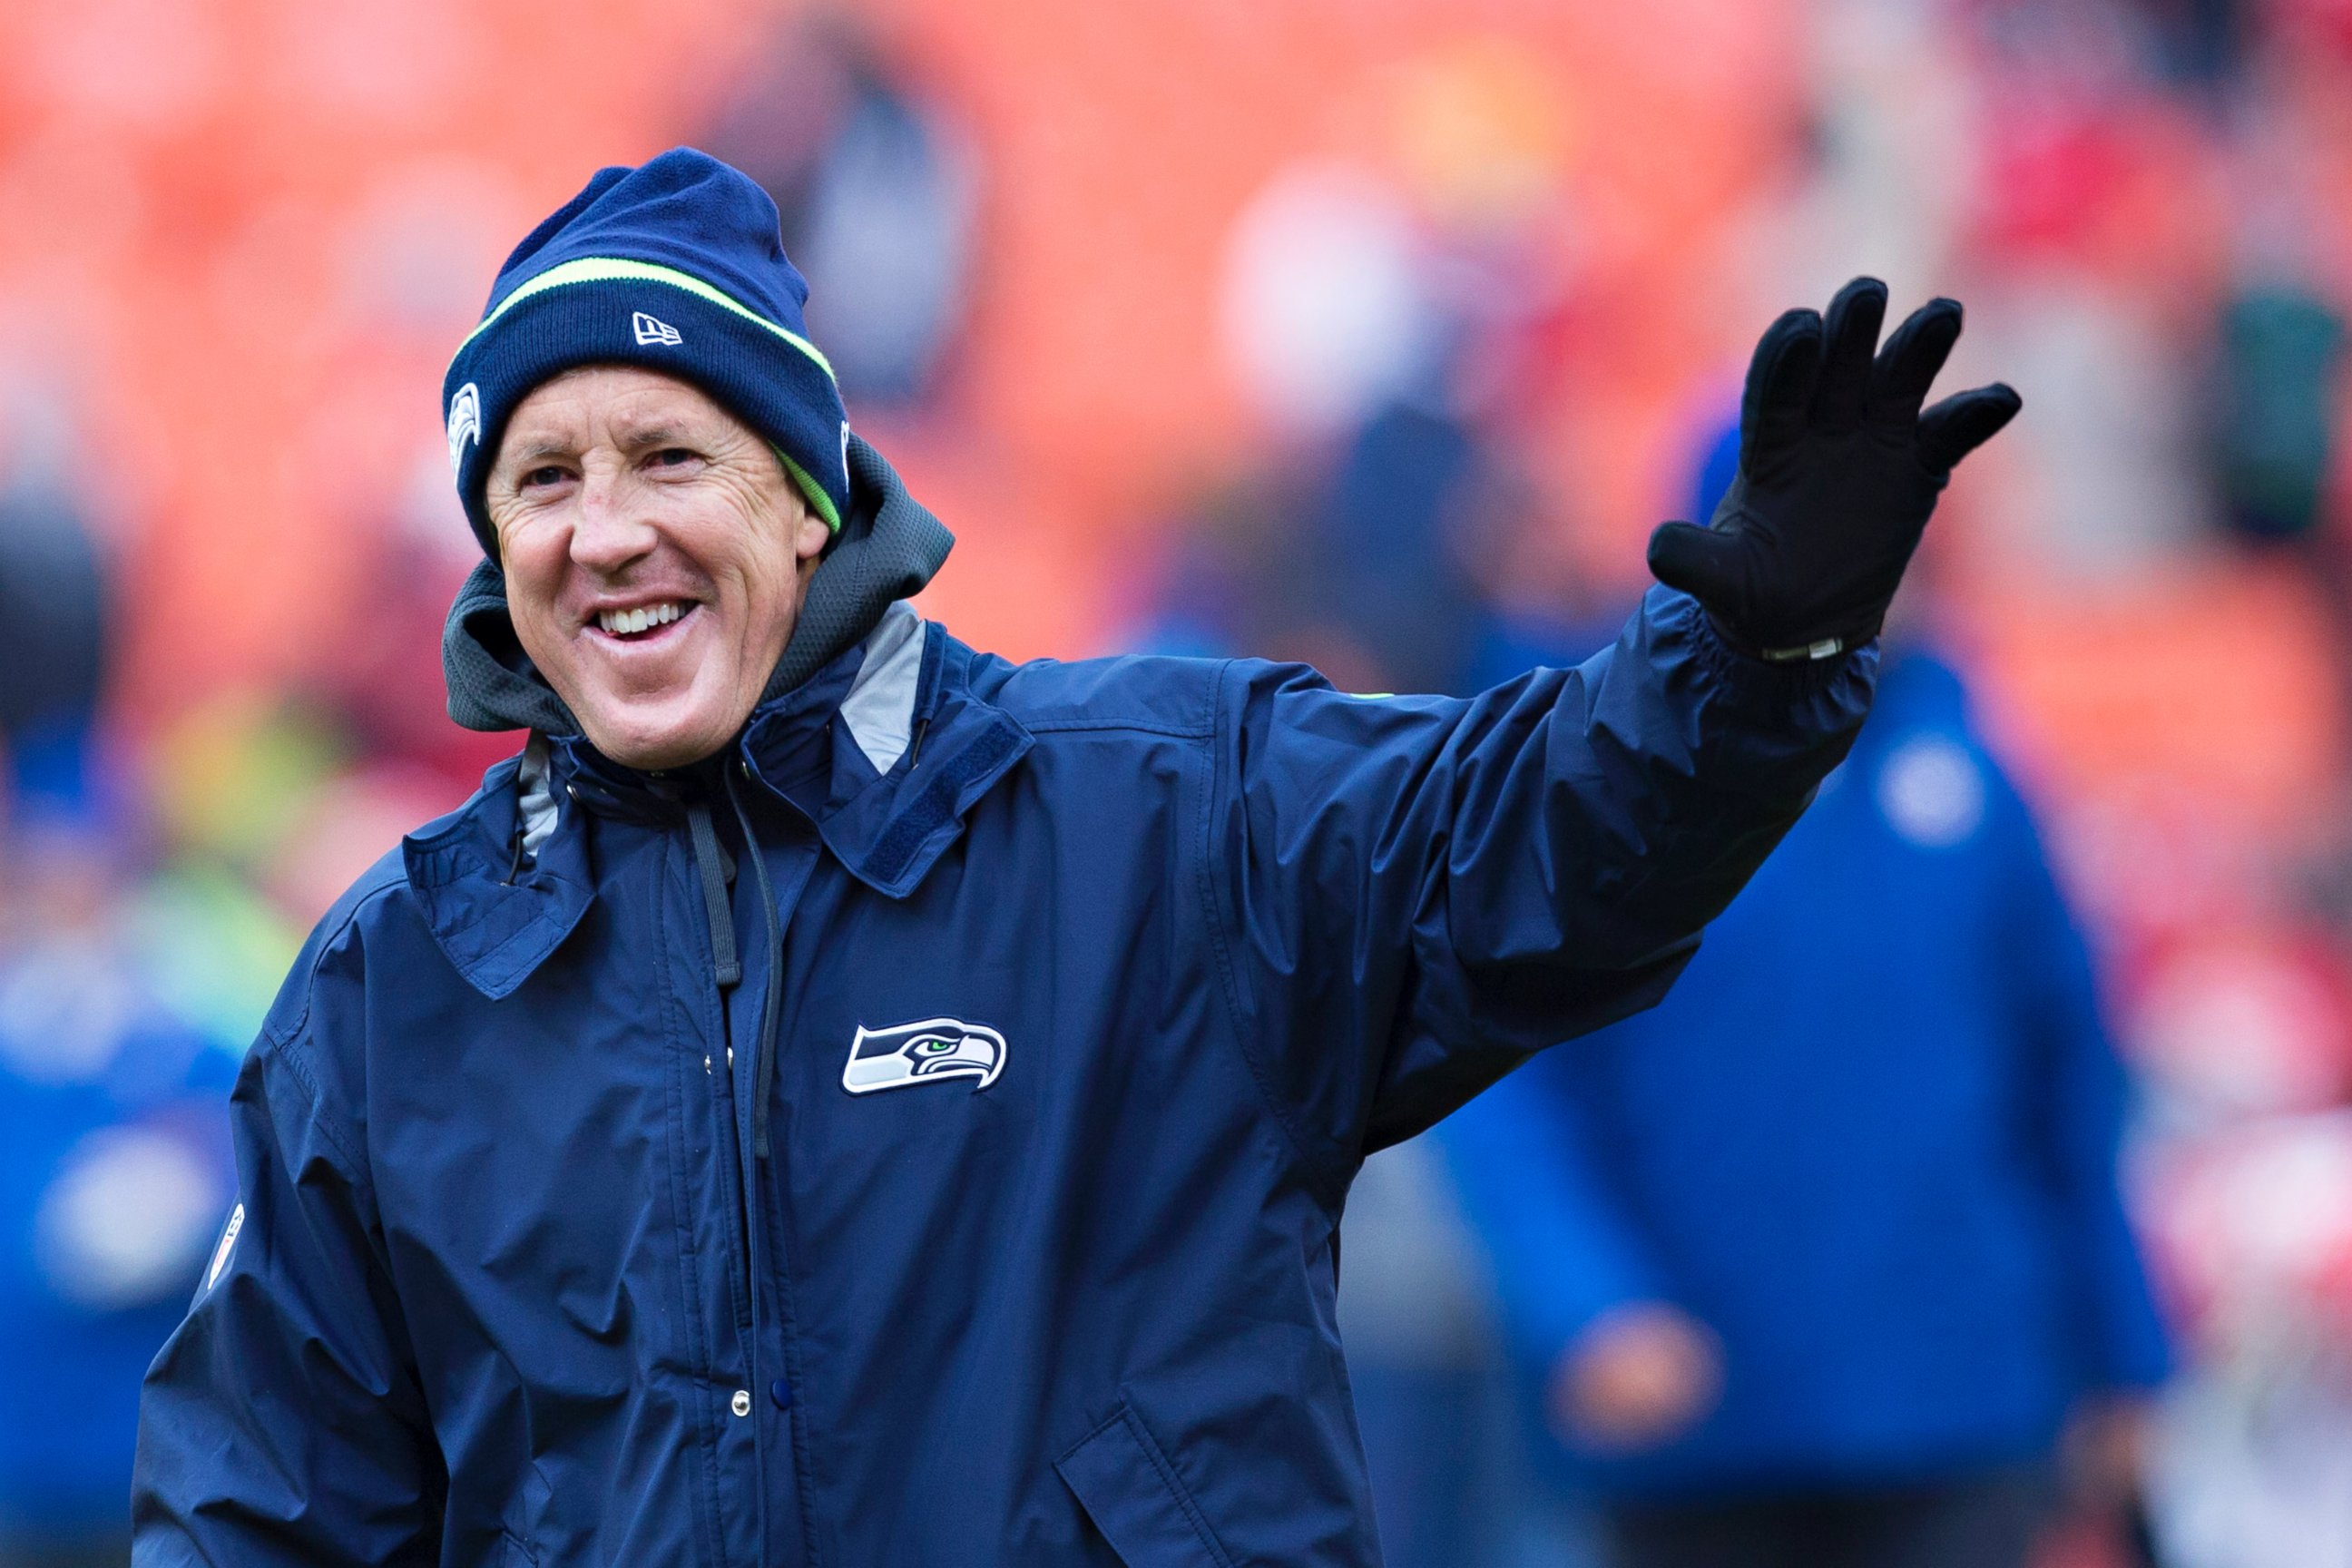 PHOTO: Head Coach Pete Carroll of the Seattle Seahawks waves to fans before a game against the Kansas City Chiefs on Nov. 16, 2014 in Kansas City, Missouri.  